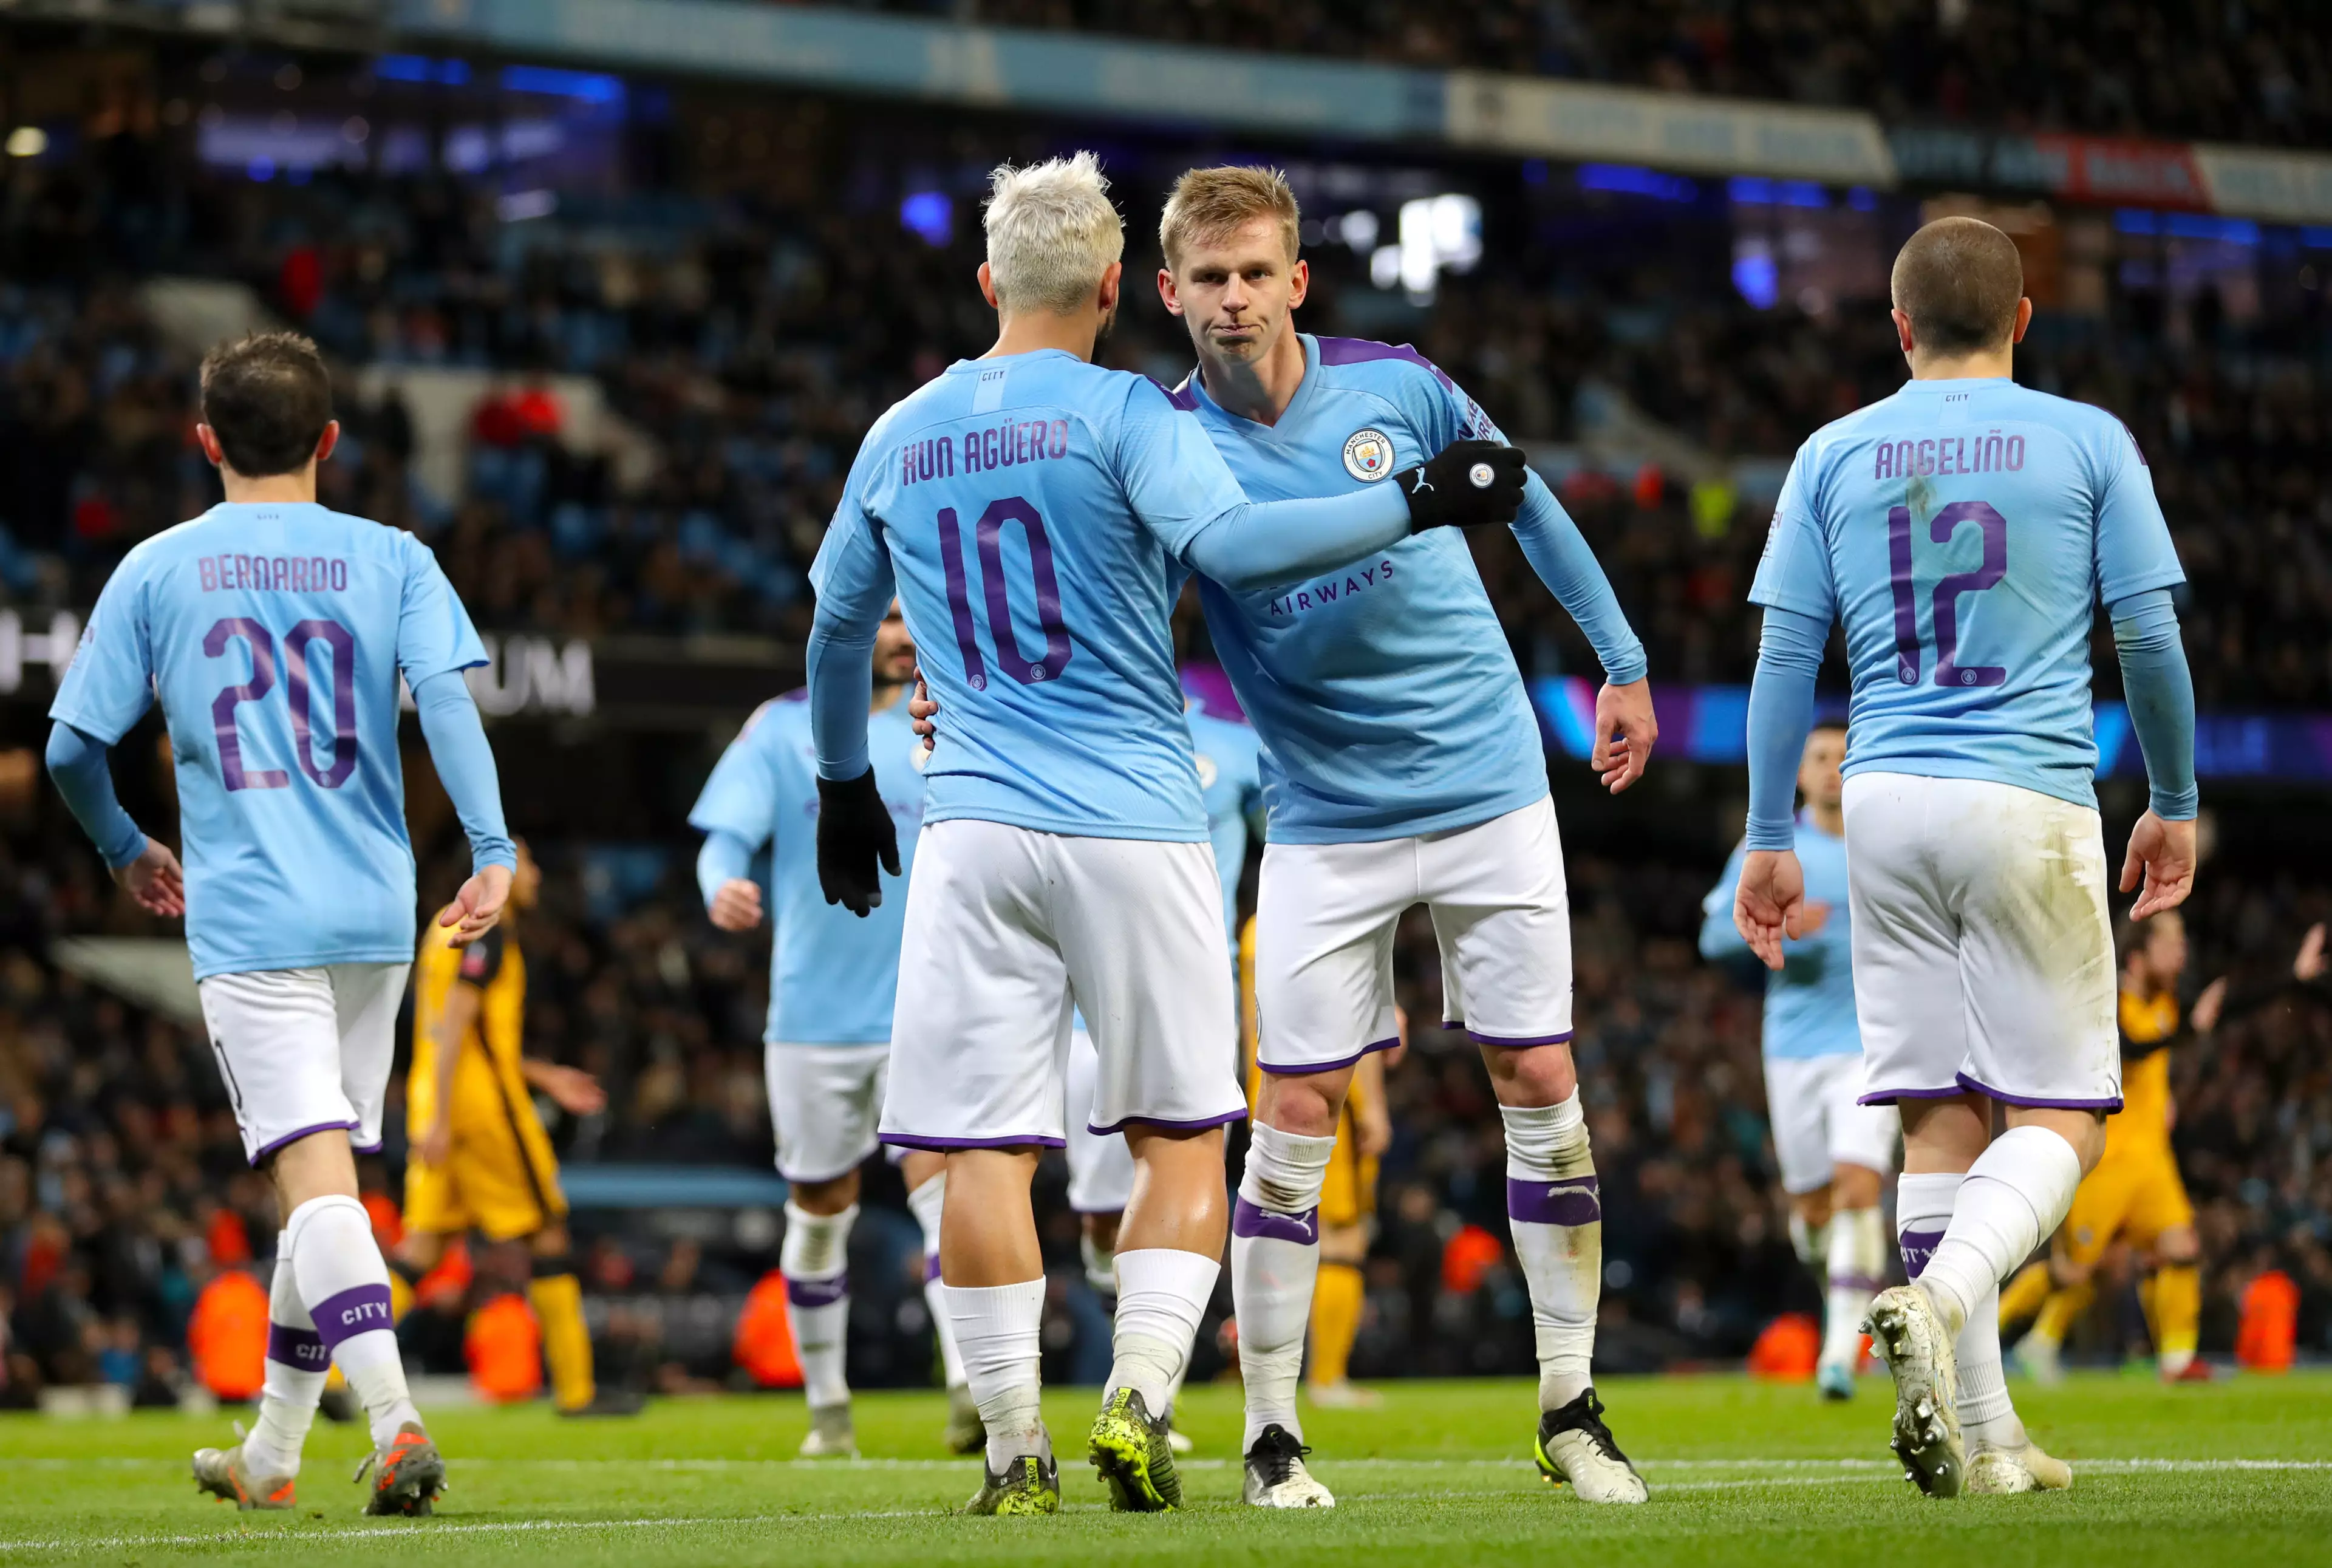 Man City ran out 4-1 winners against Port Vale at the Etihad